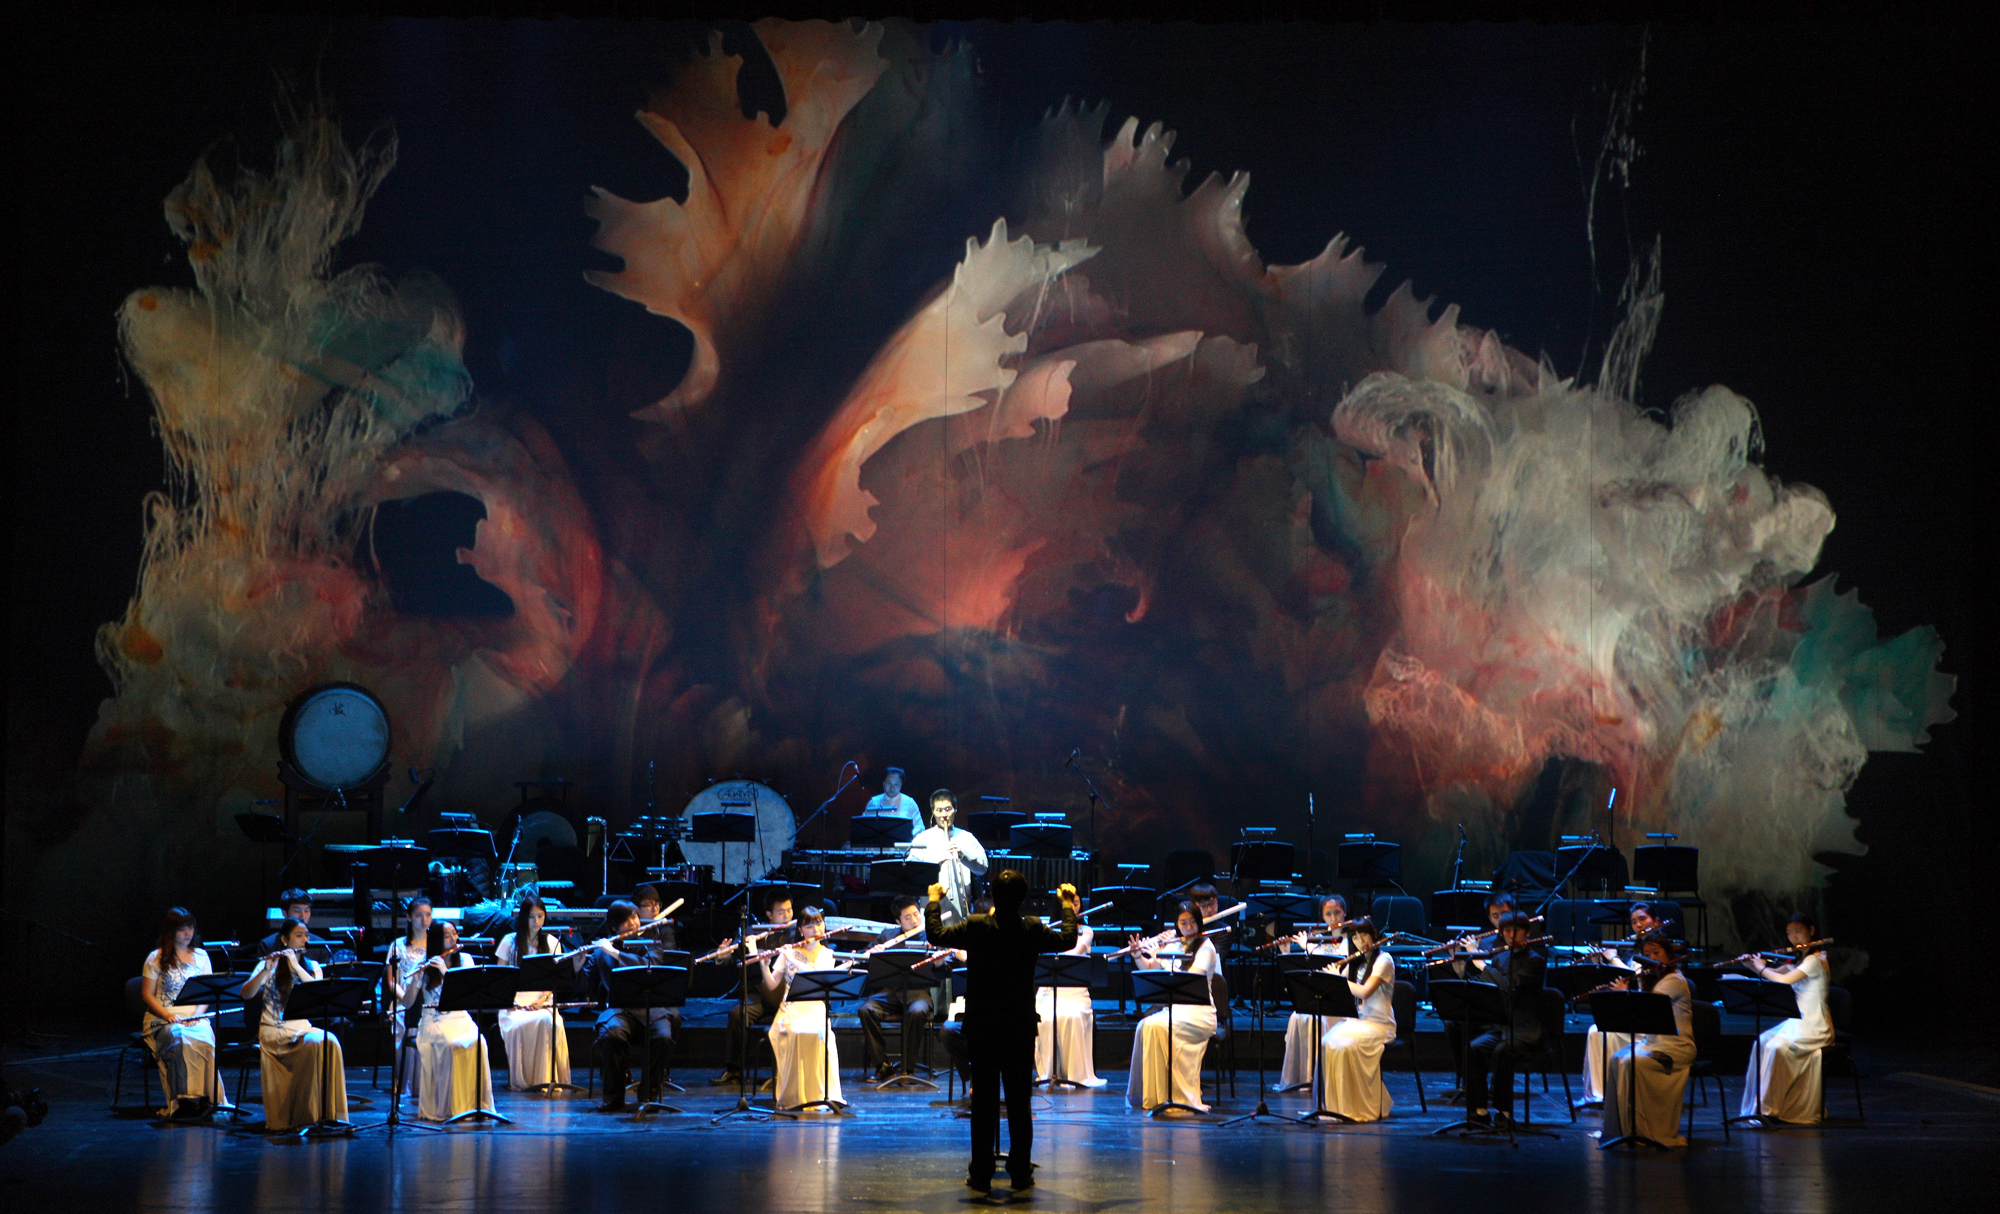 A large group of musicians playing Chinese bamboo flutes onstage with a conductor with a very colorful cloud-like image in the background.